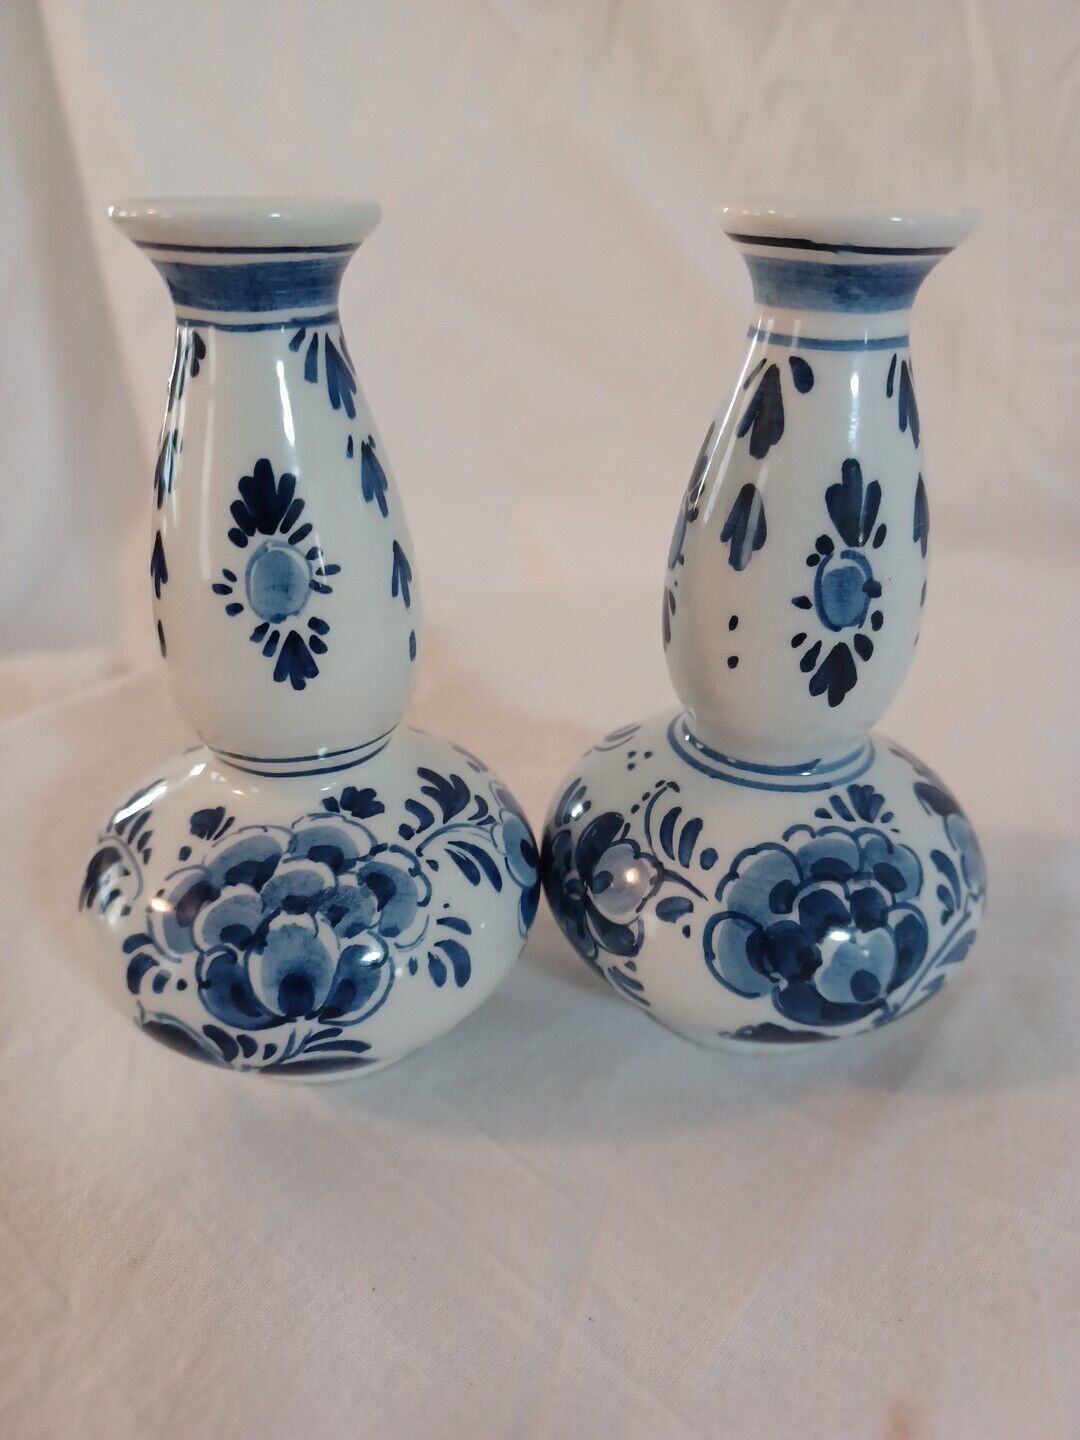 DELFT BUD VASE 2 Antique SIGNED AND NUMBERED 3.87” Tall, Very Small